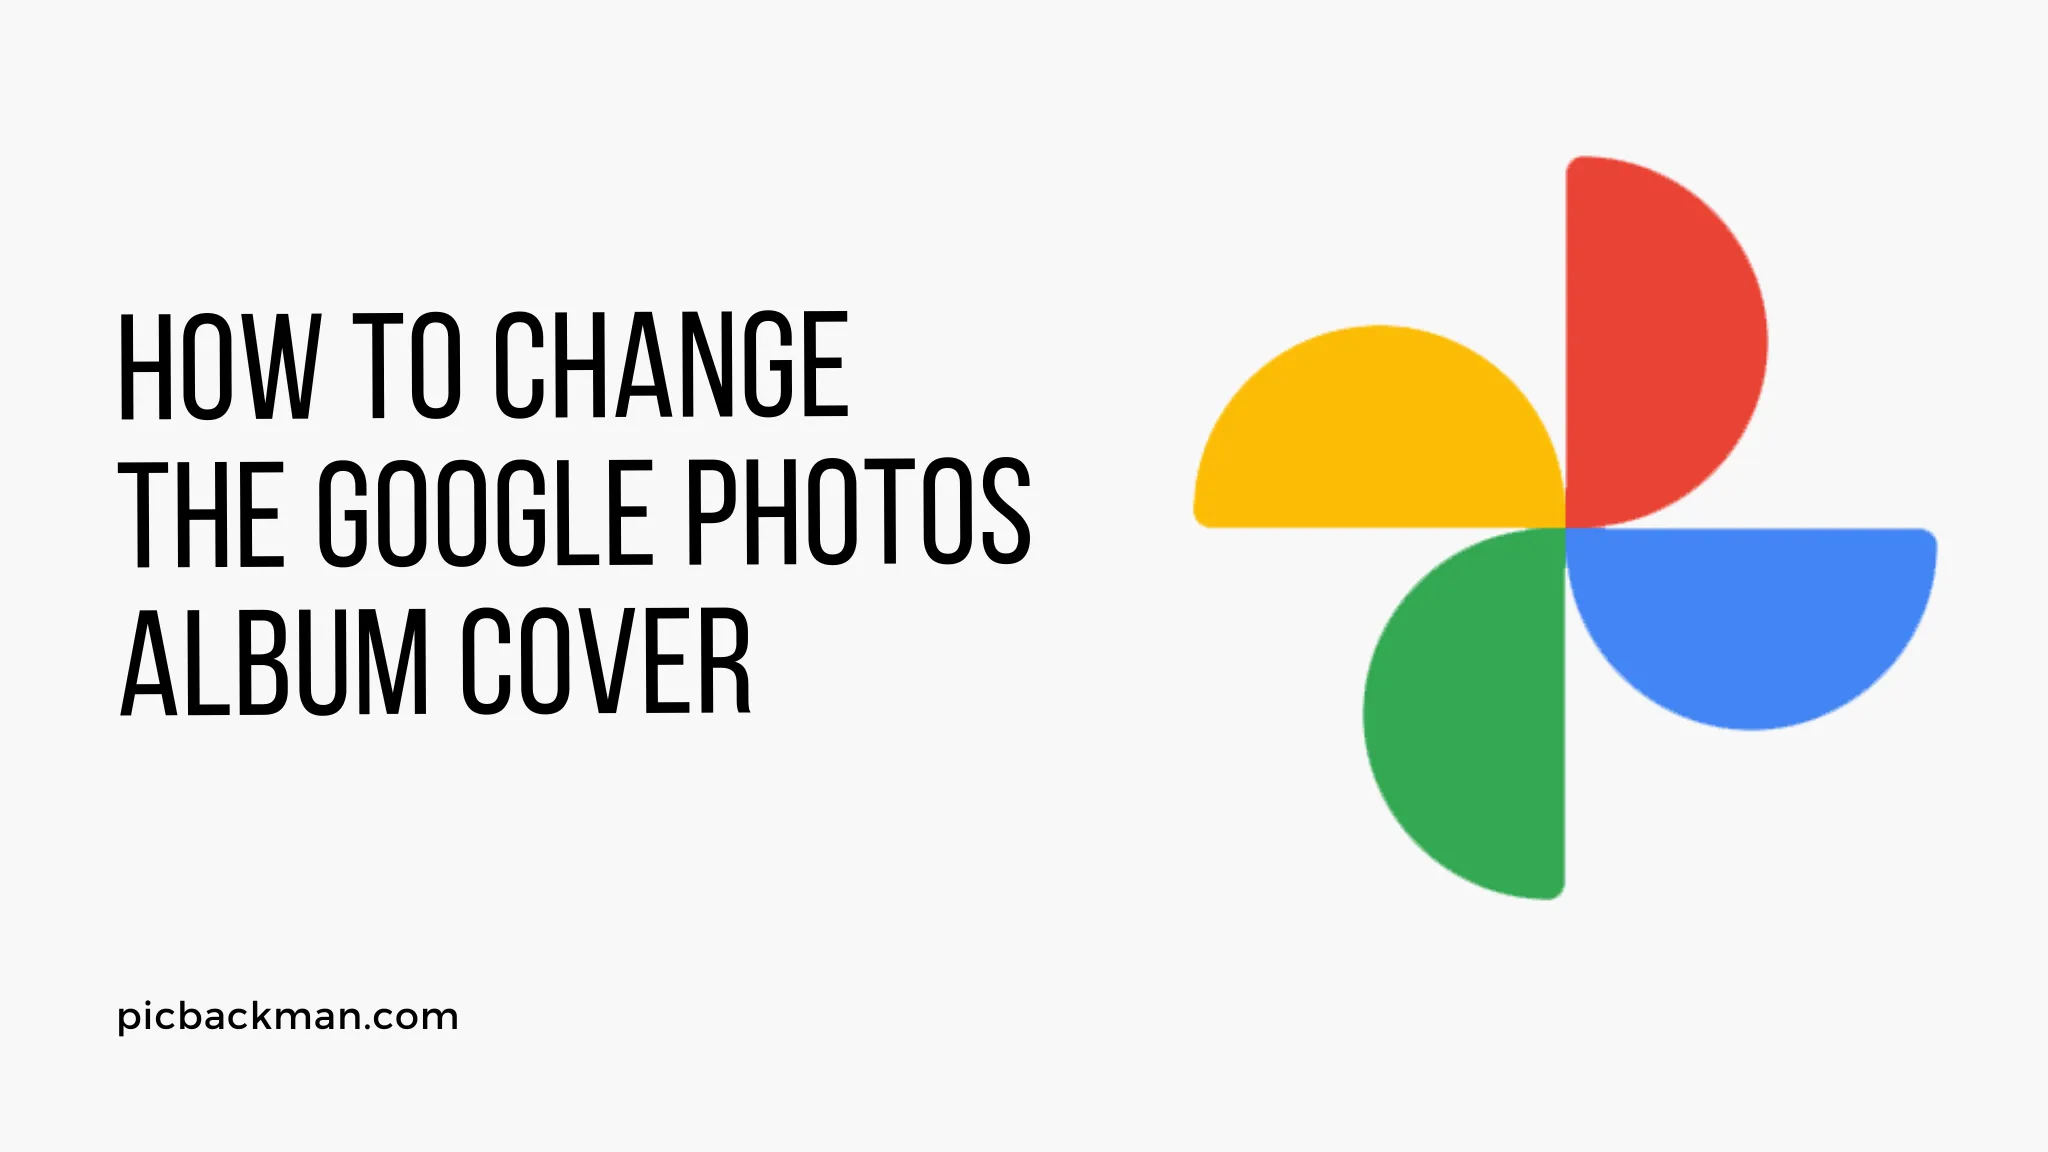 How to change the Google Photos album cover?